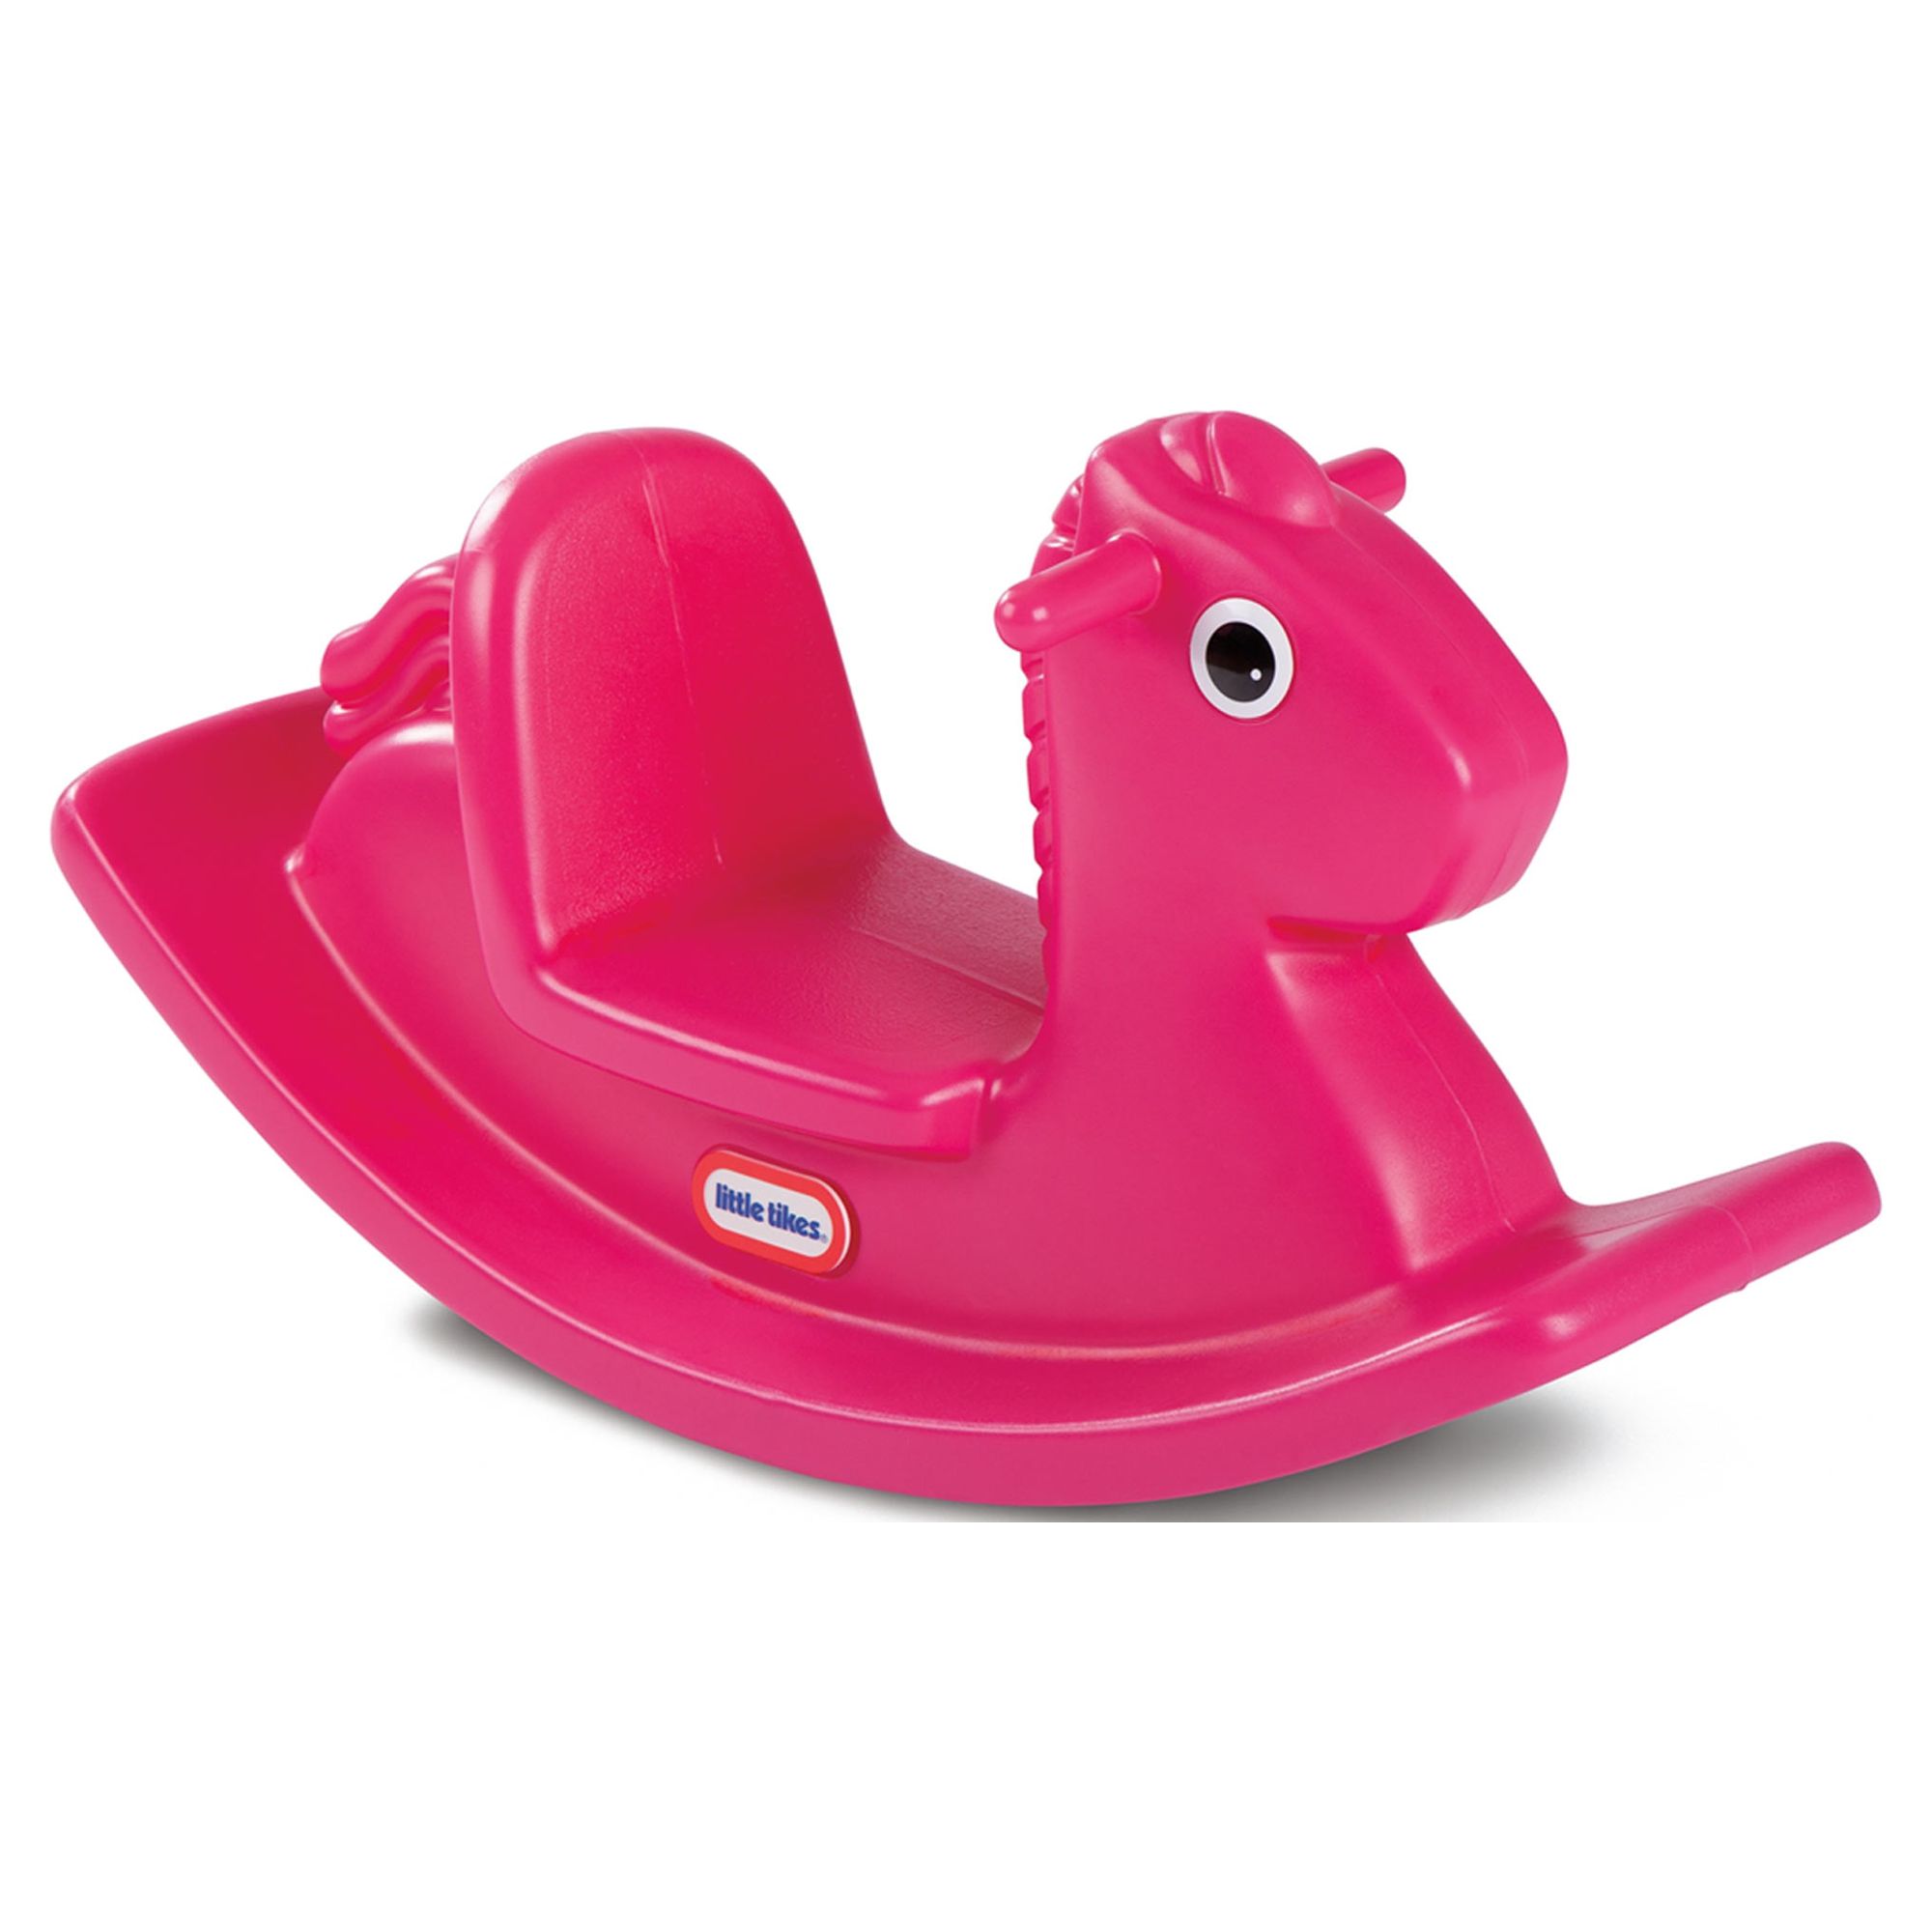 Little Tikes Kids Rocking Horse in Magenta, Classic Indoor Outdoor Toddler Ride-on Toy, Kids Boys Girls Ages 12 Months to 3 Years - image 1 of 5